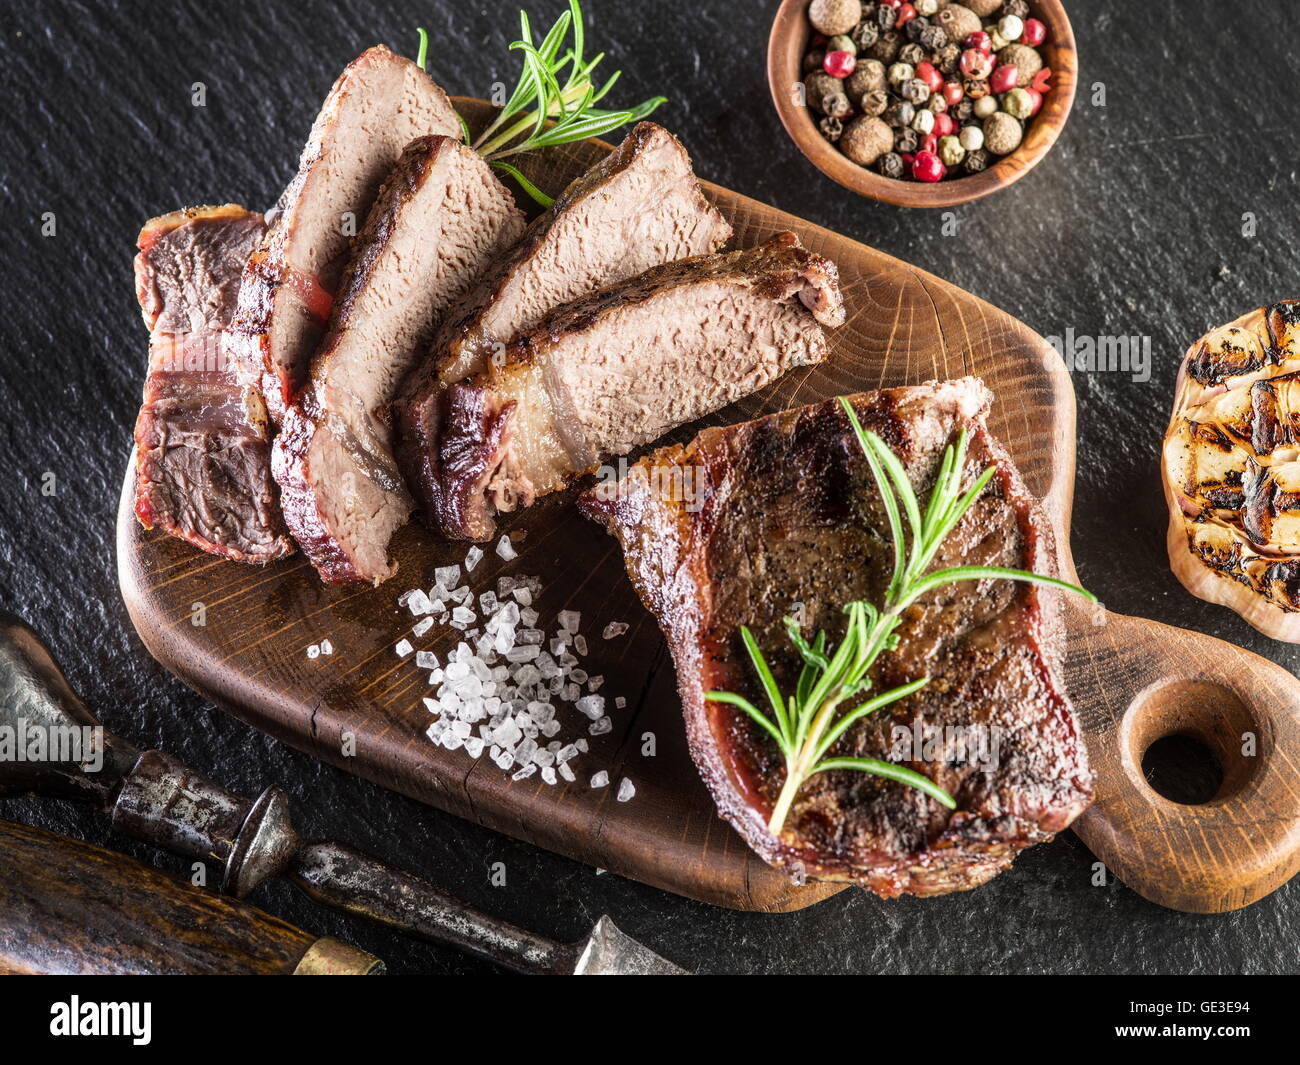 Steak Rib eye with spices on the wooden tray. Stock Photo